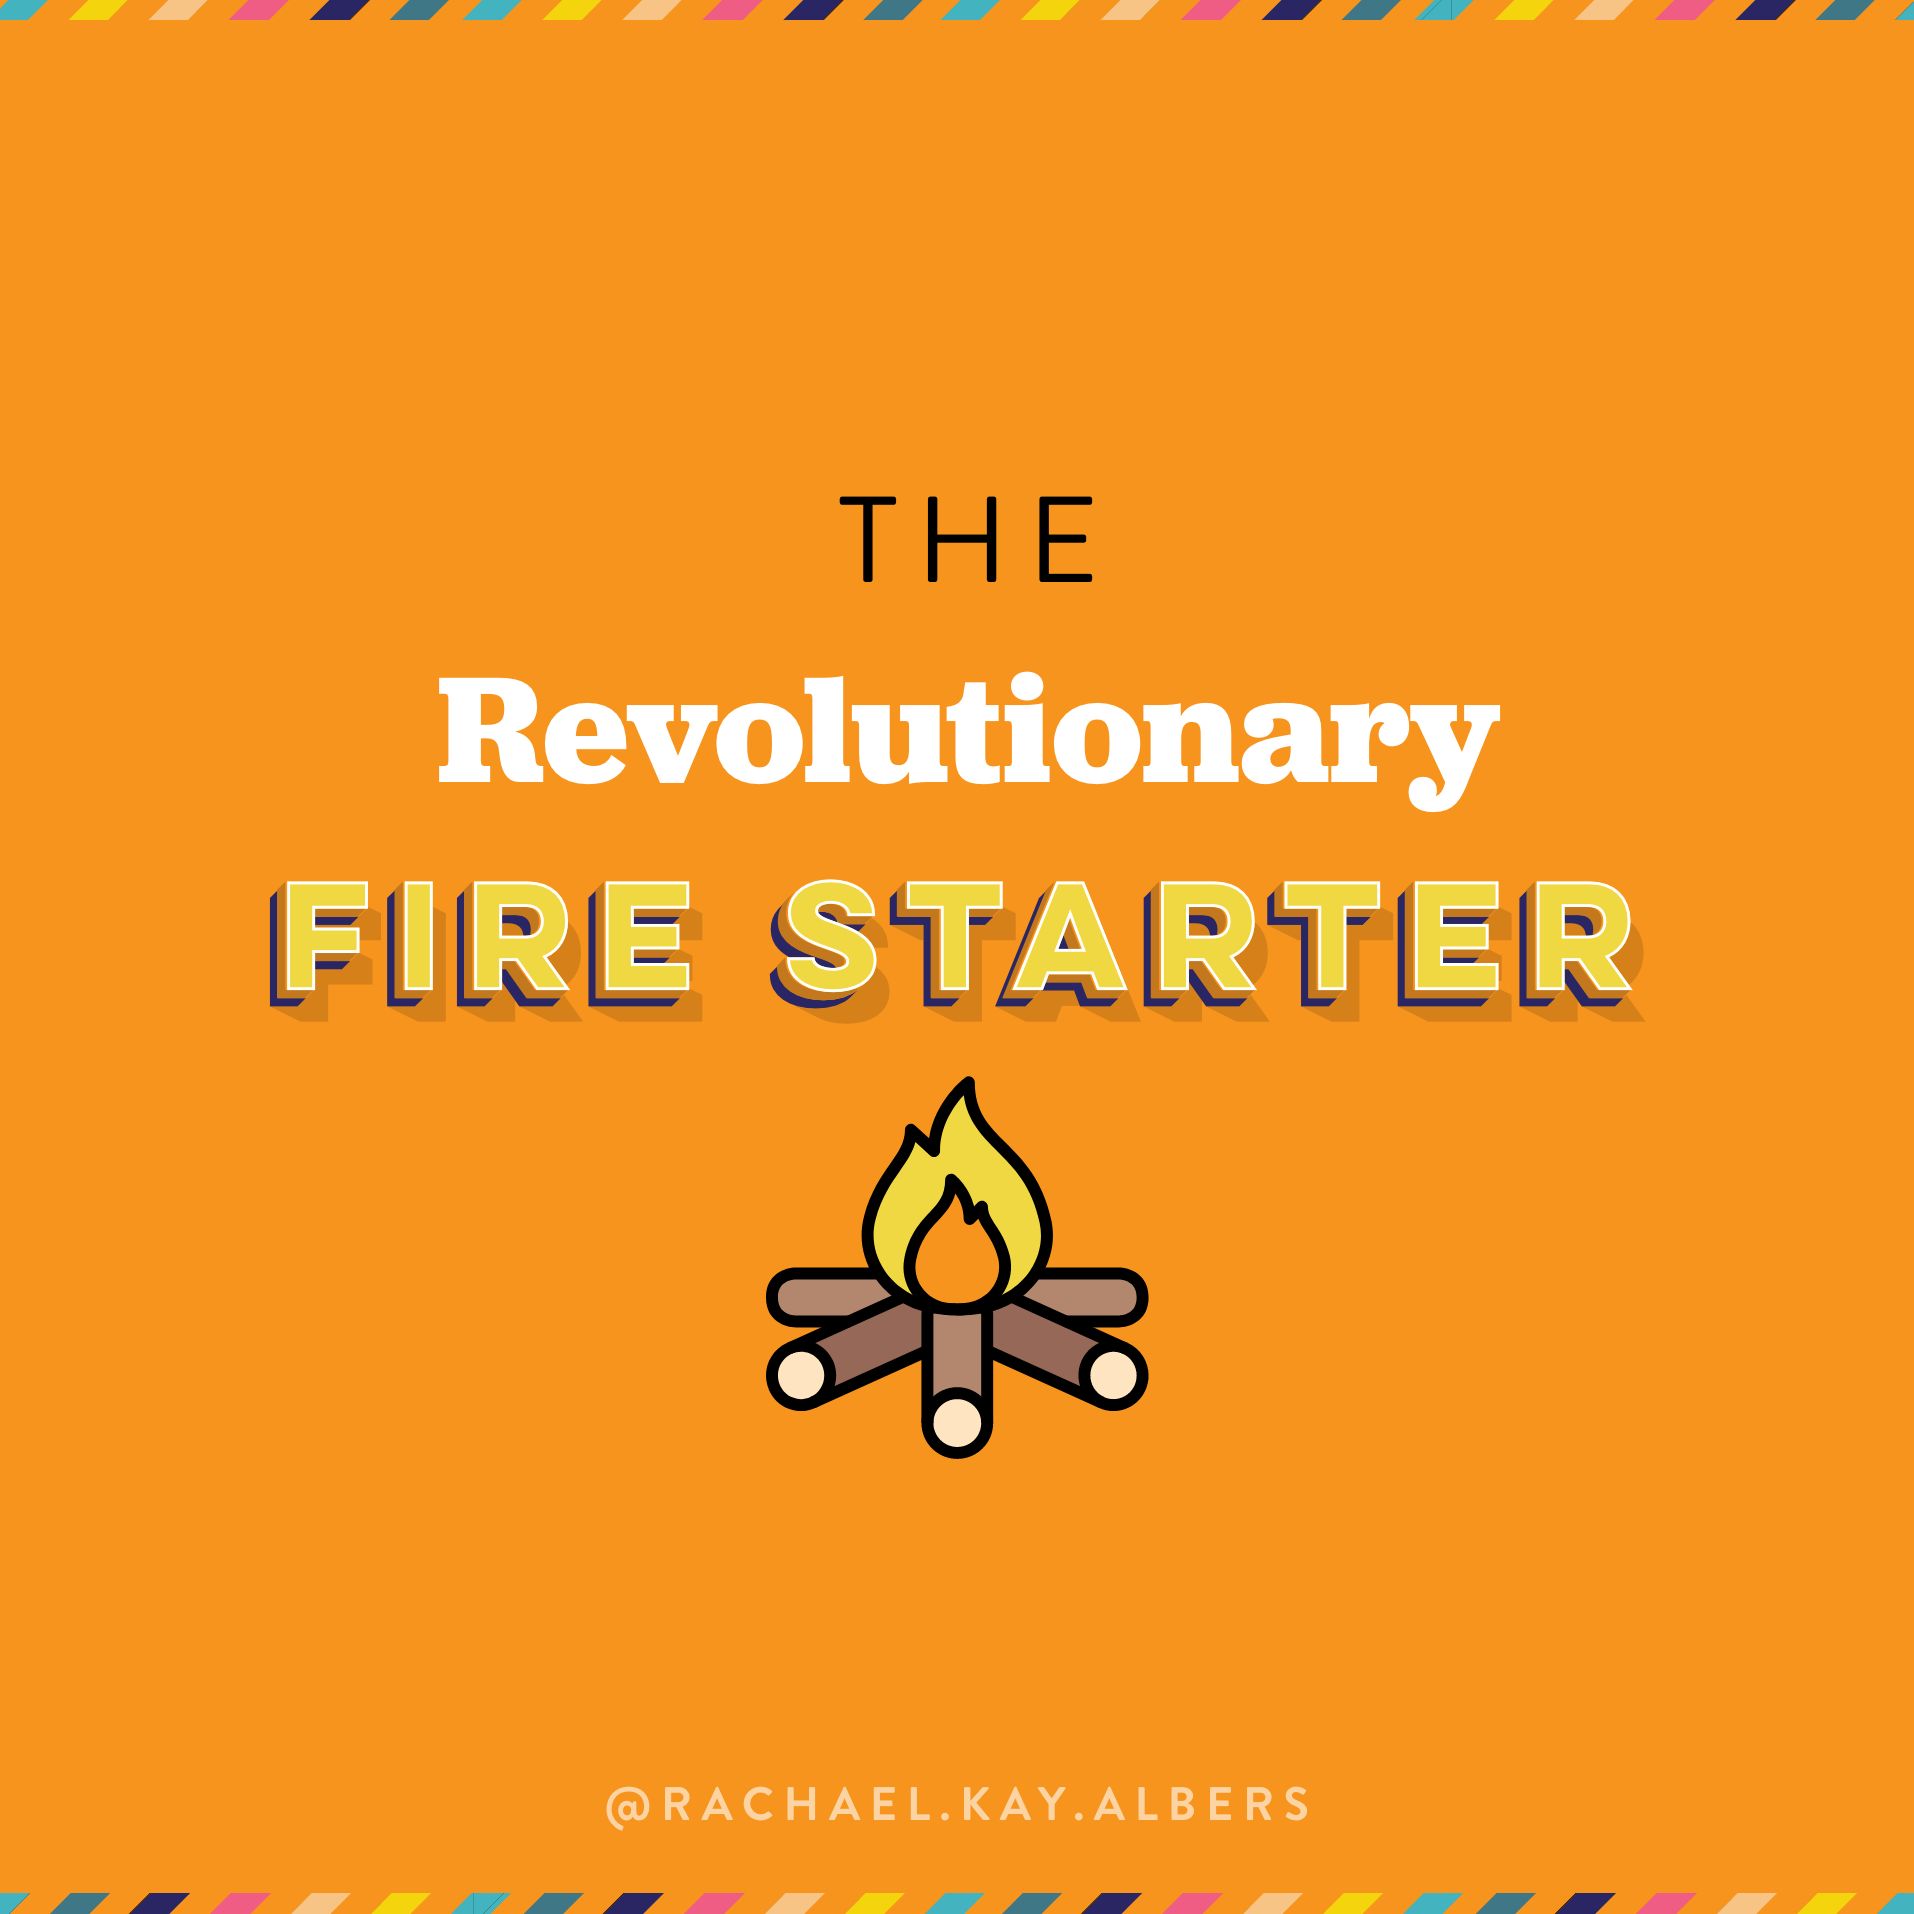 The Revolutionary Fire Starter- 4 Types of Change Makers - Rachael Kay Albers